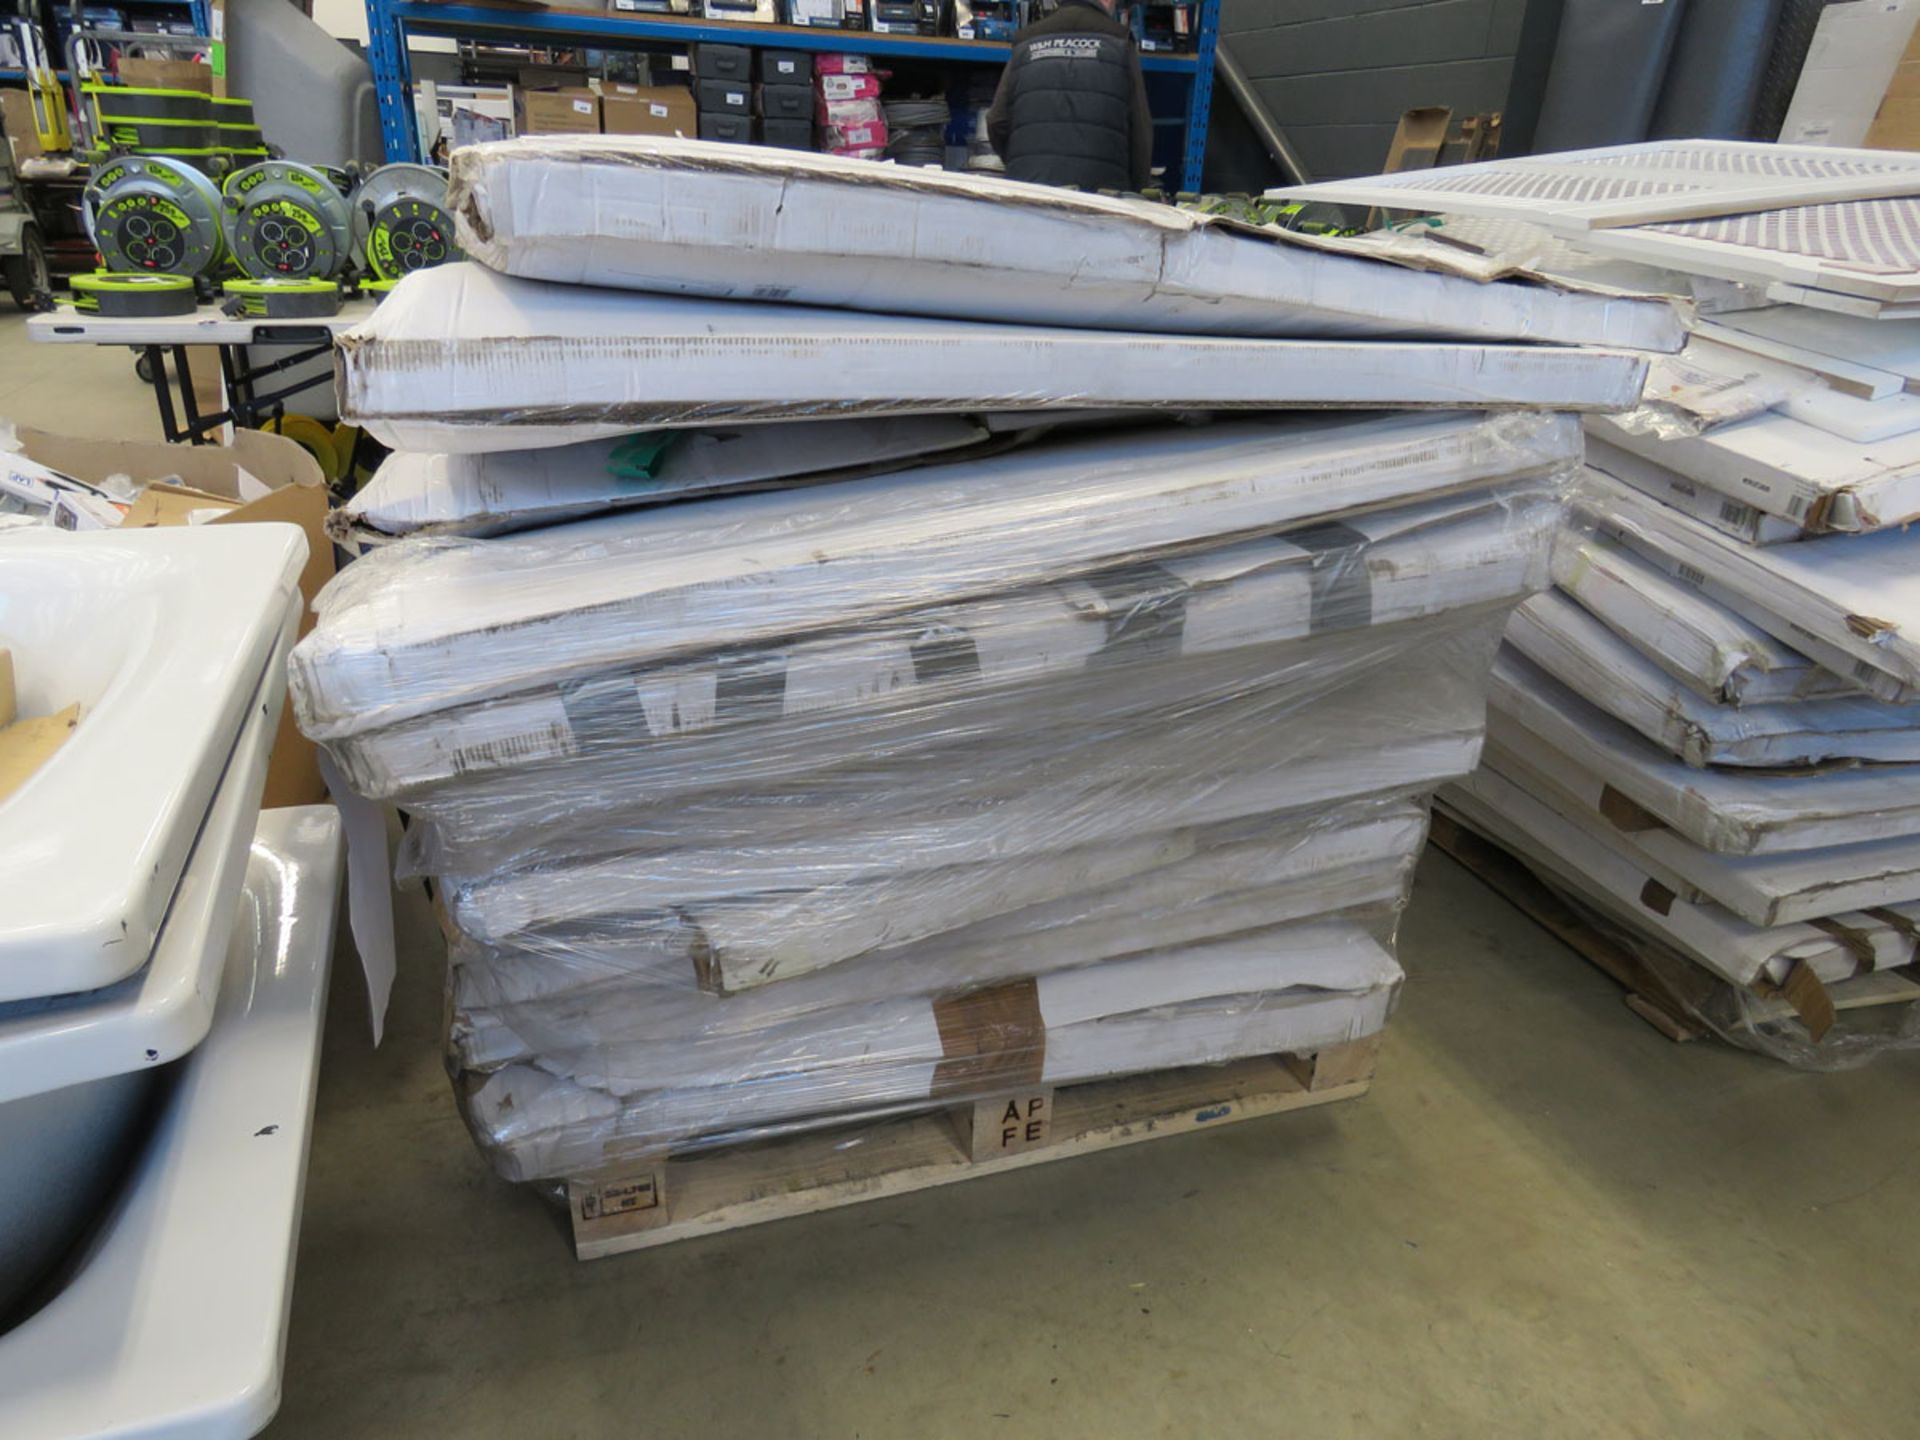 Pallet of radiator covers